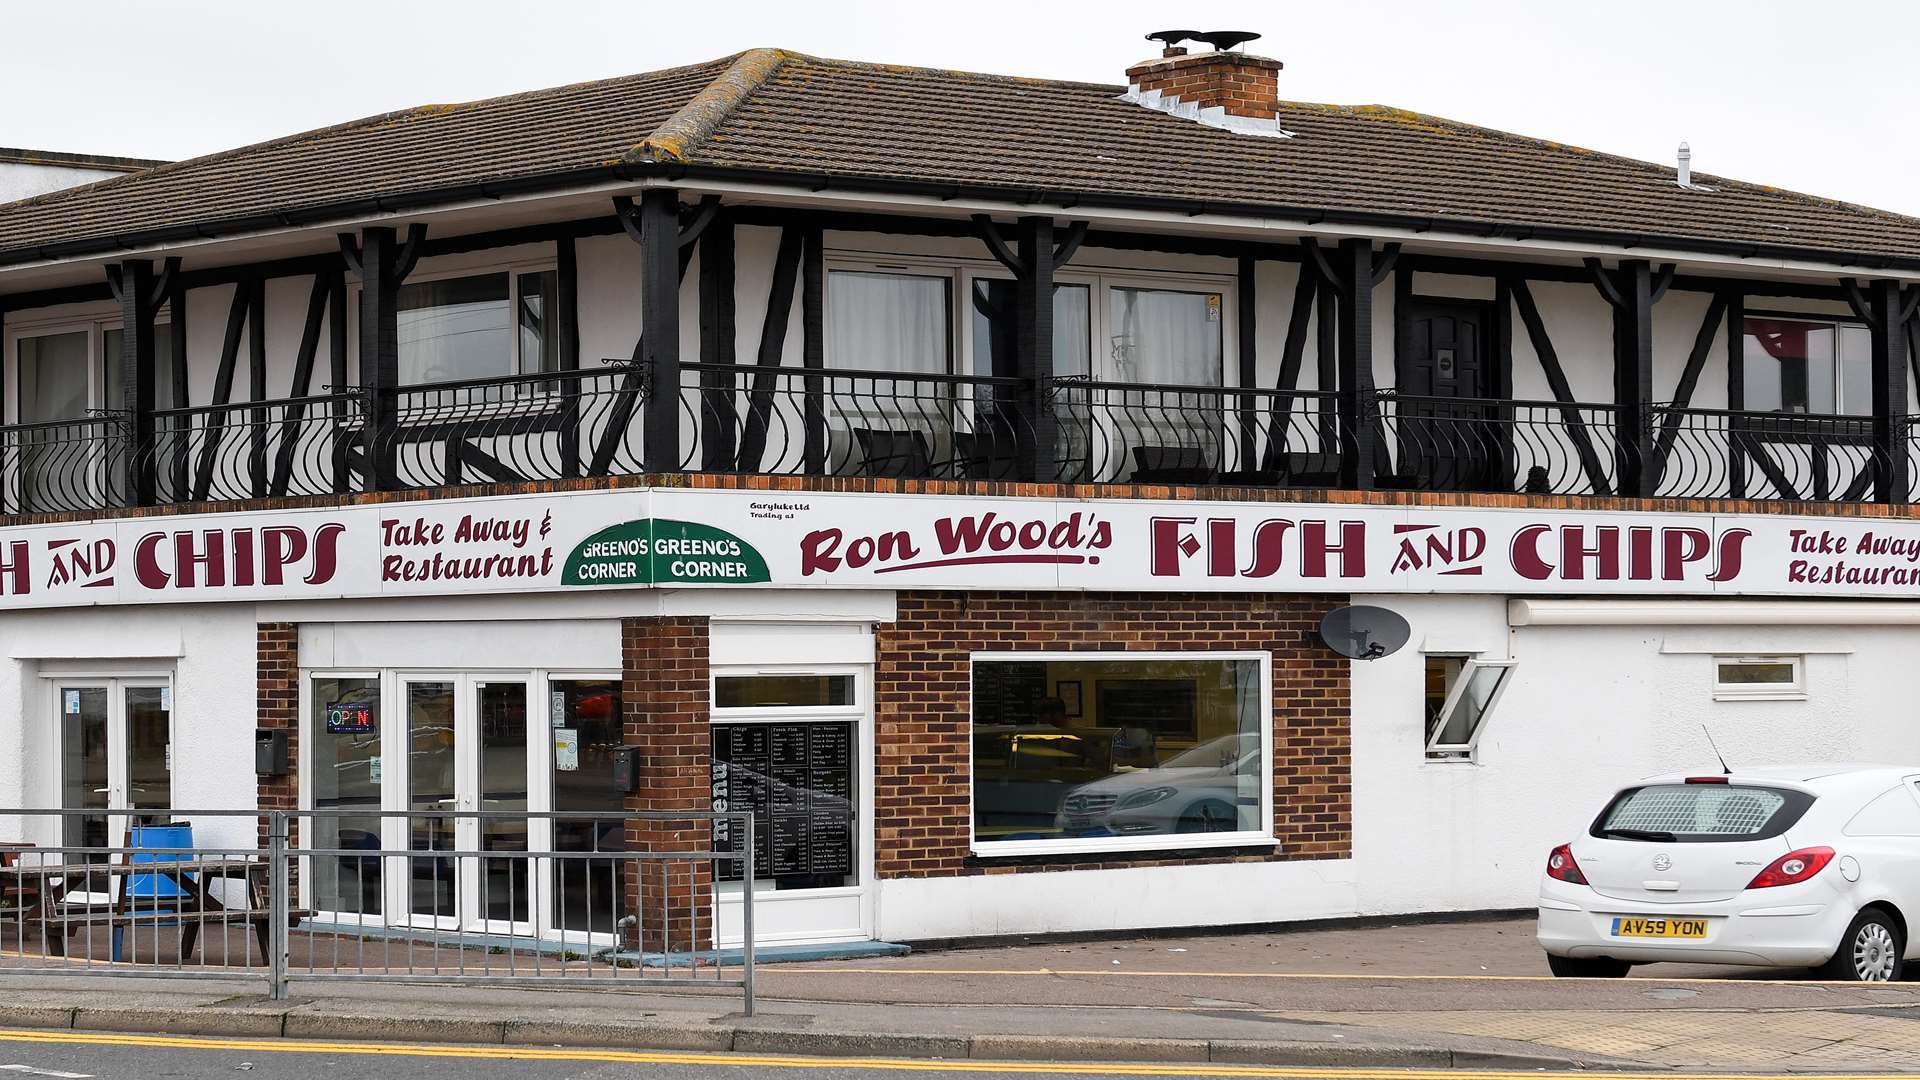 Ron Wood's fish and chip shop